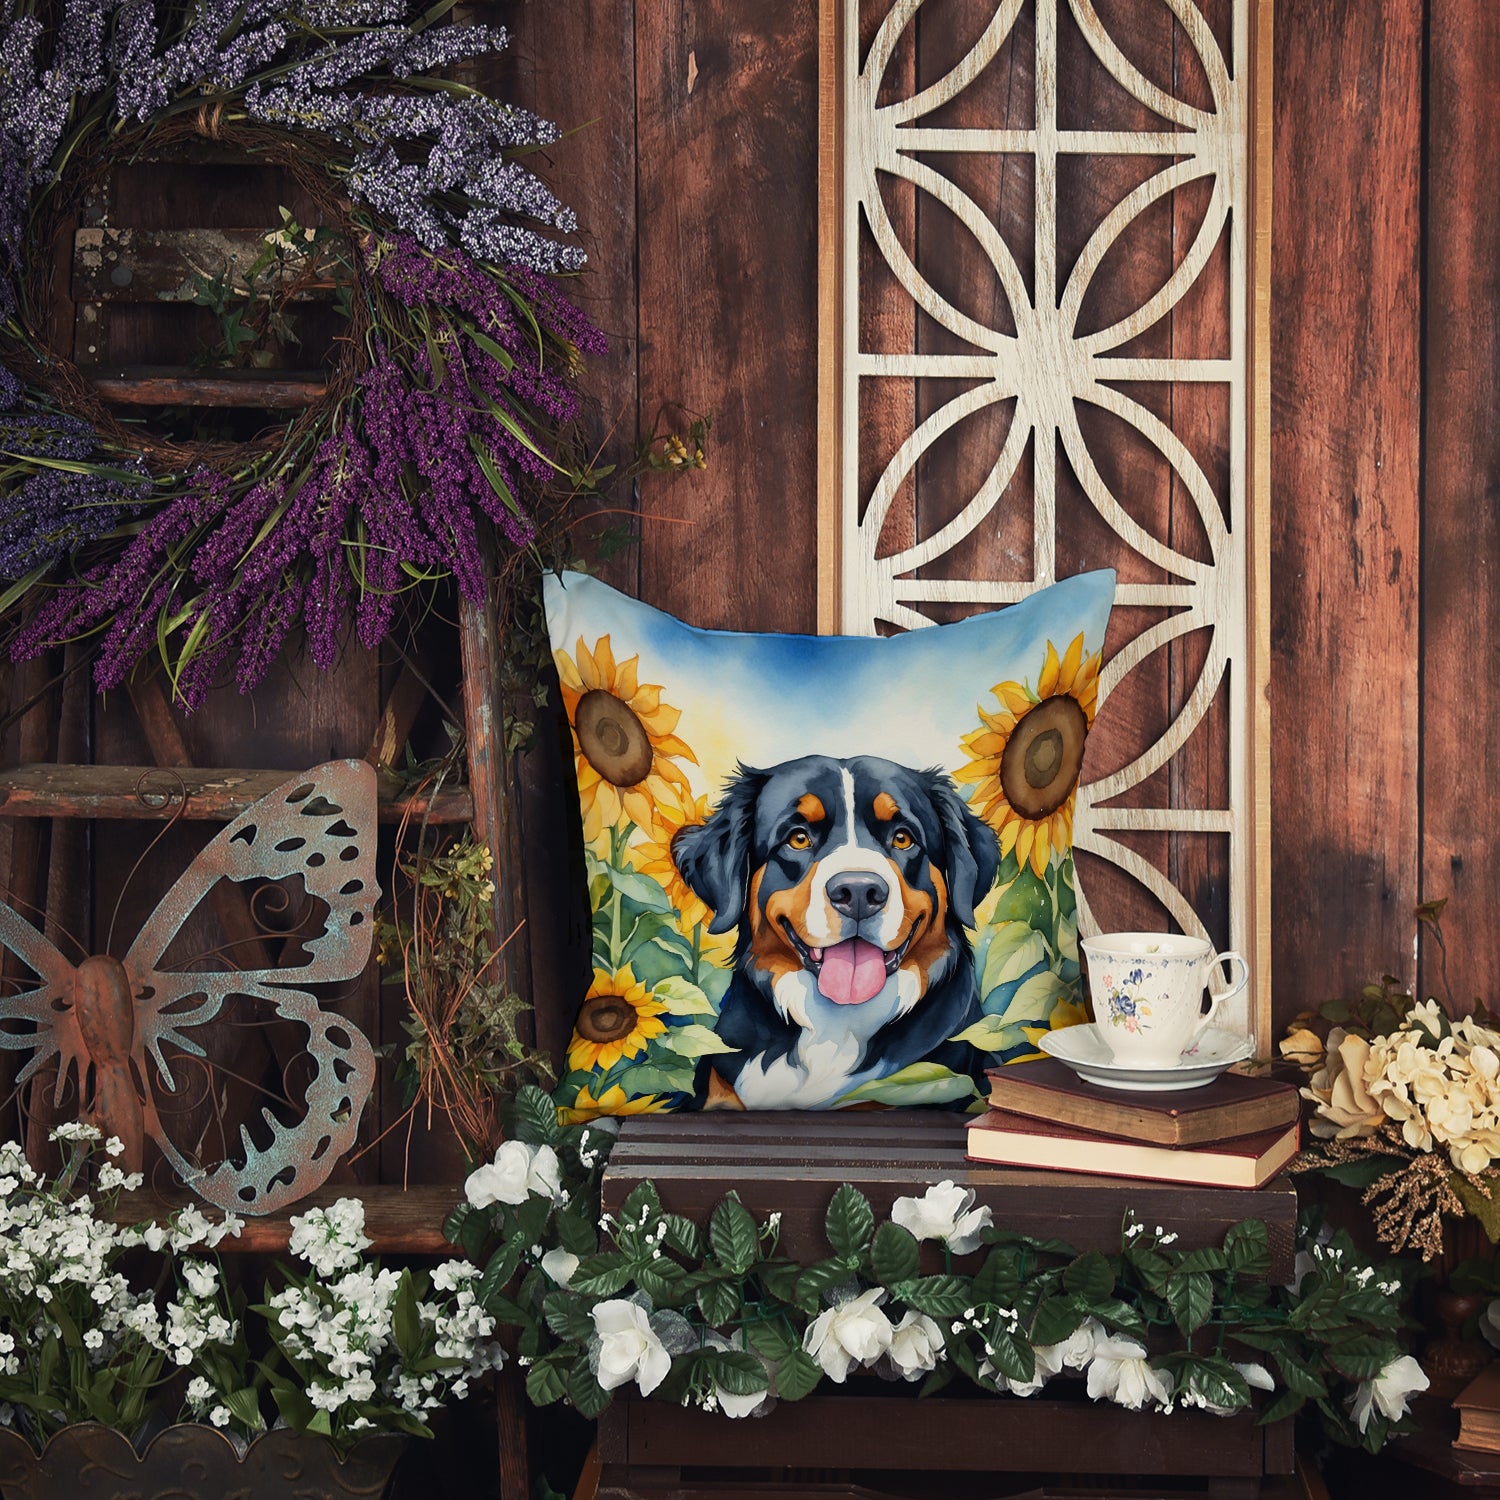 Bernese Mountain Dog in Sunflowers Throw Pillow